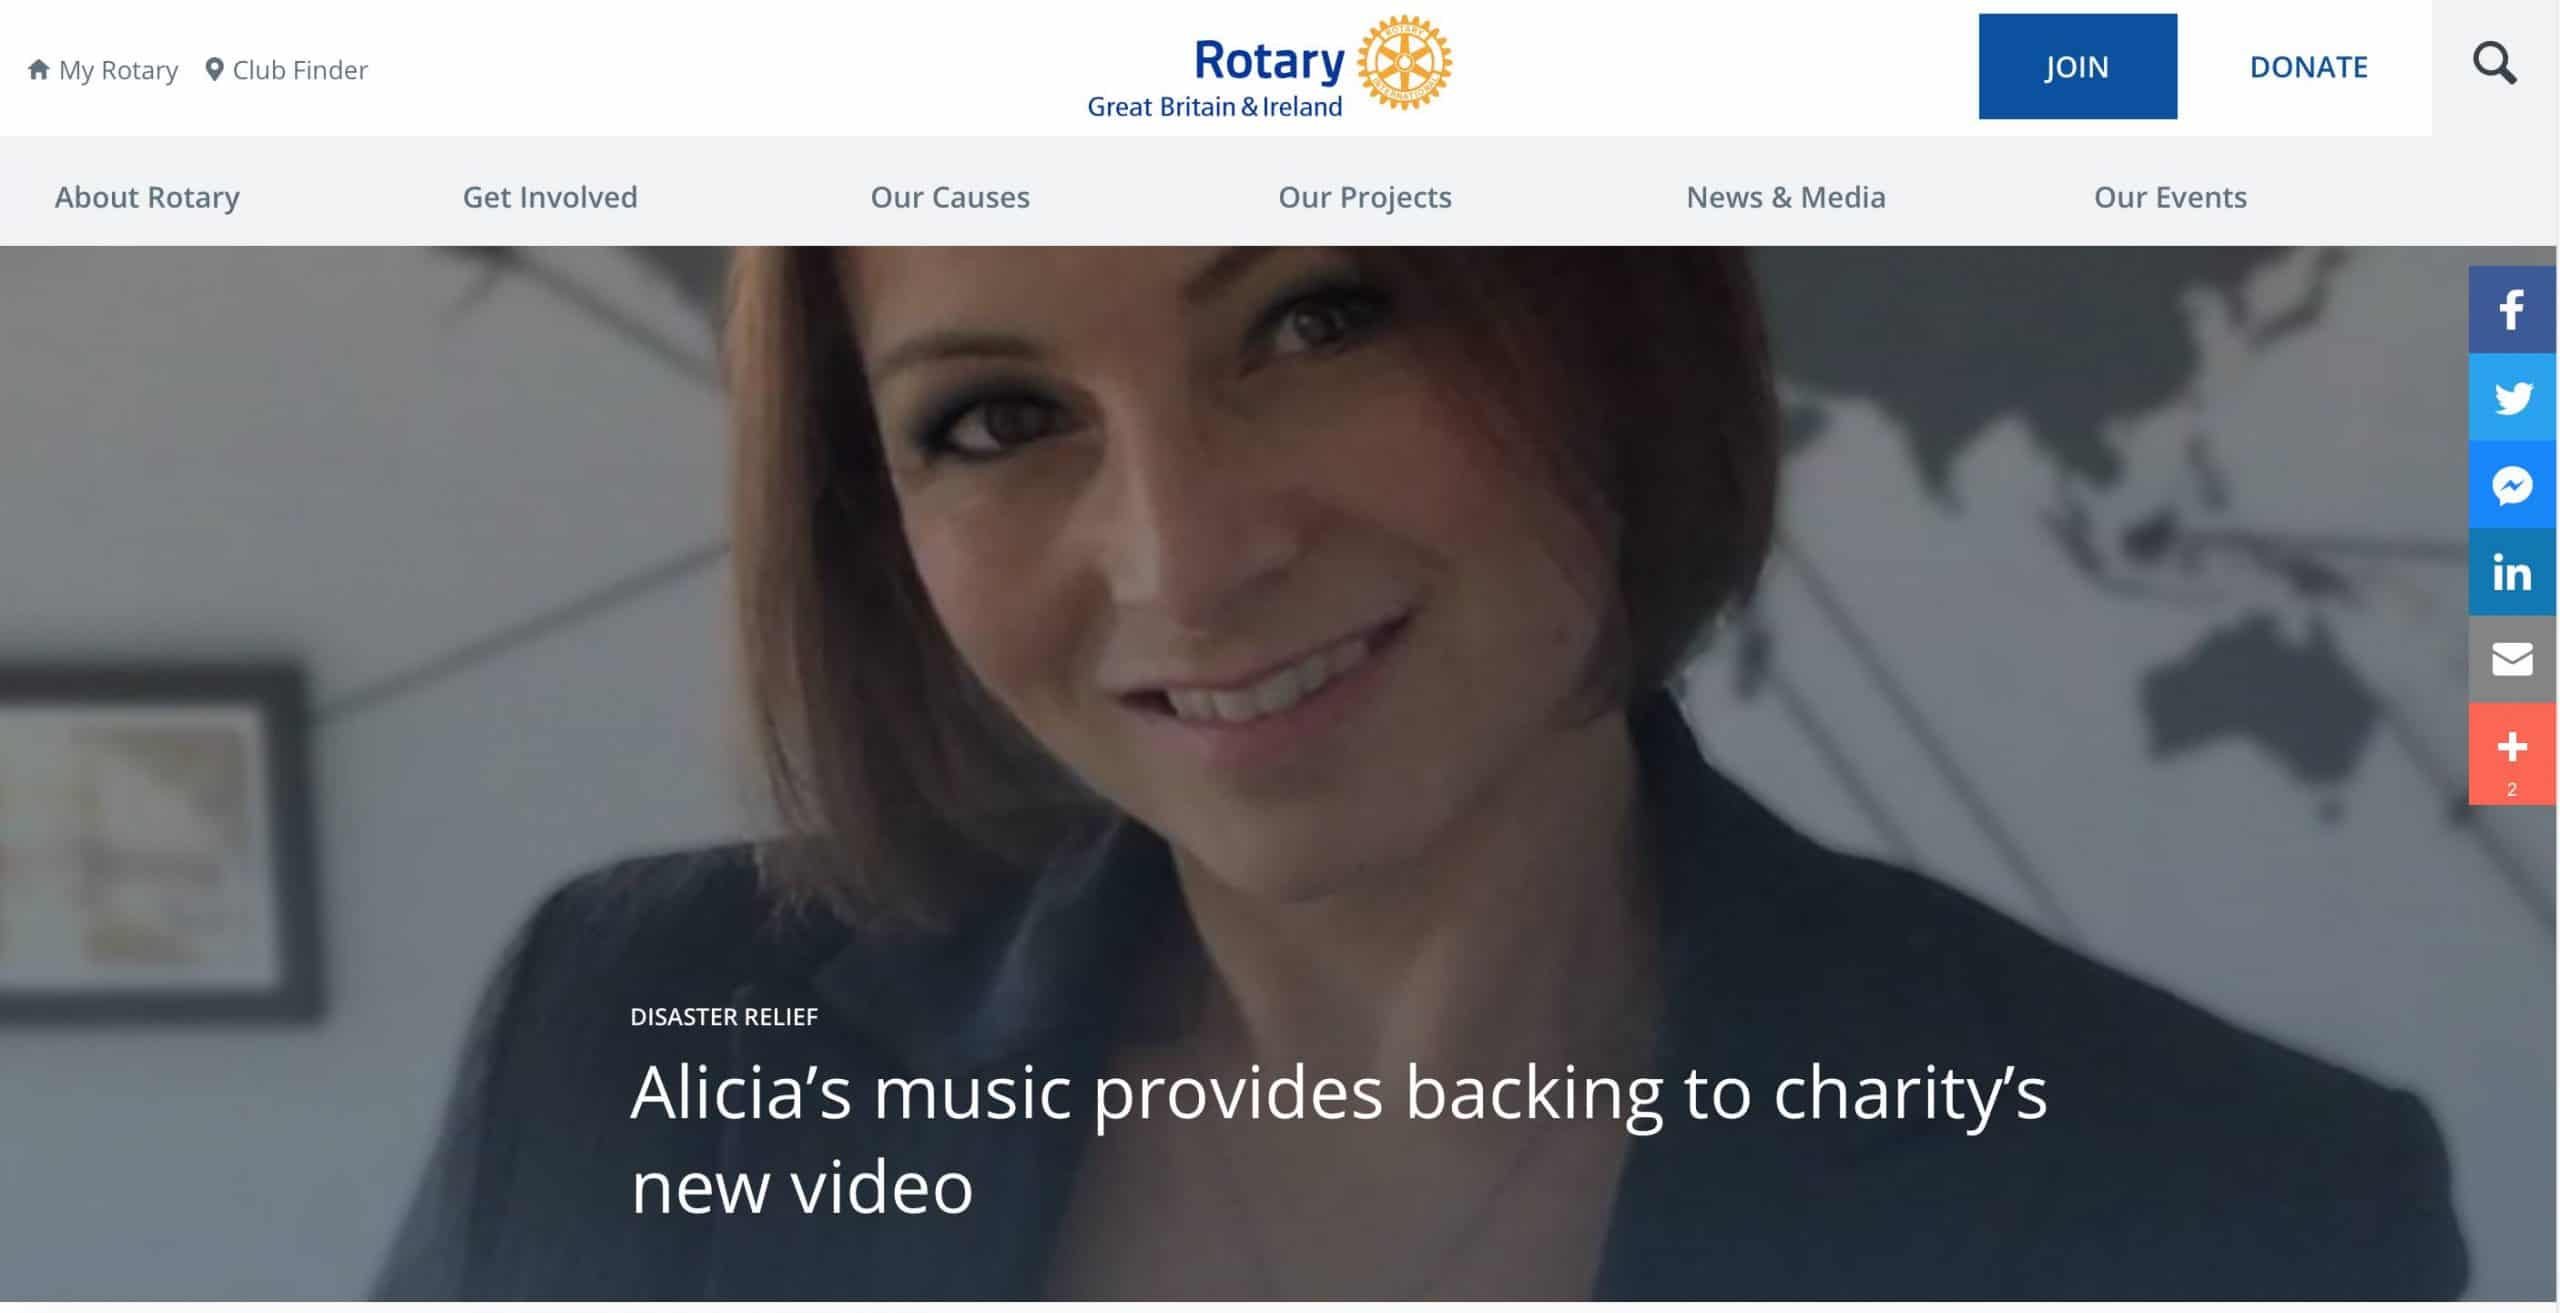 Alicia's Music provides backing to charity's new video